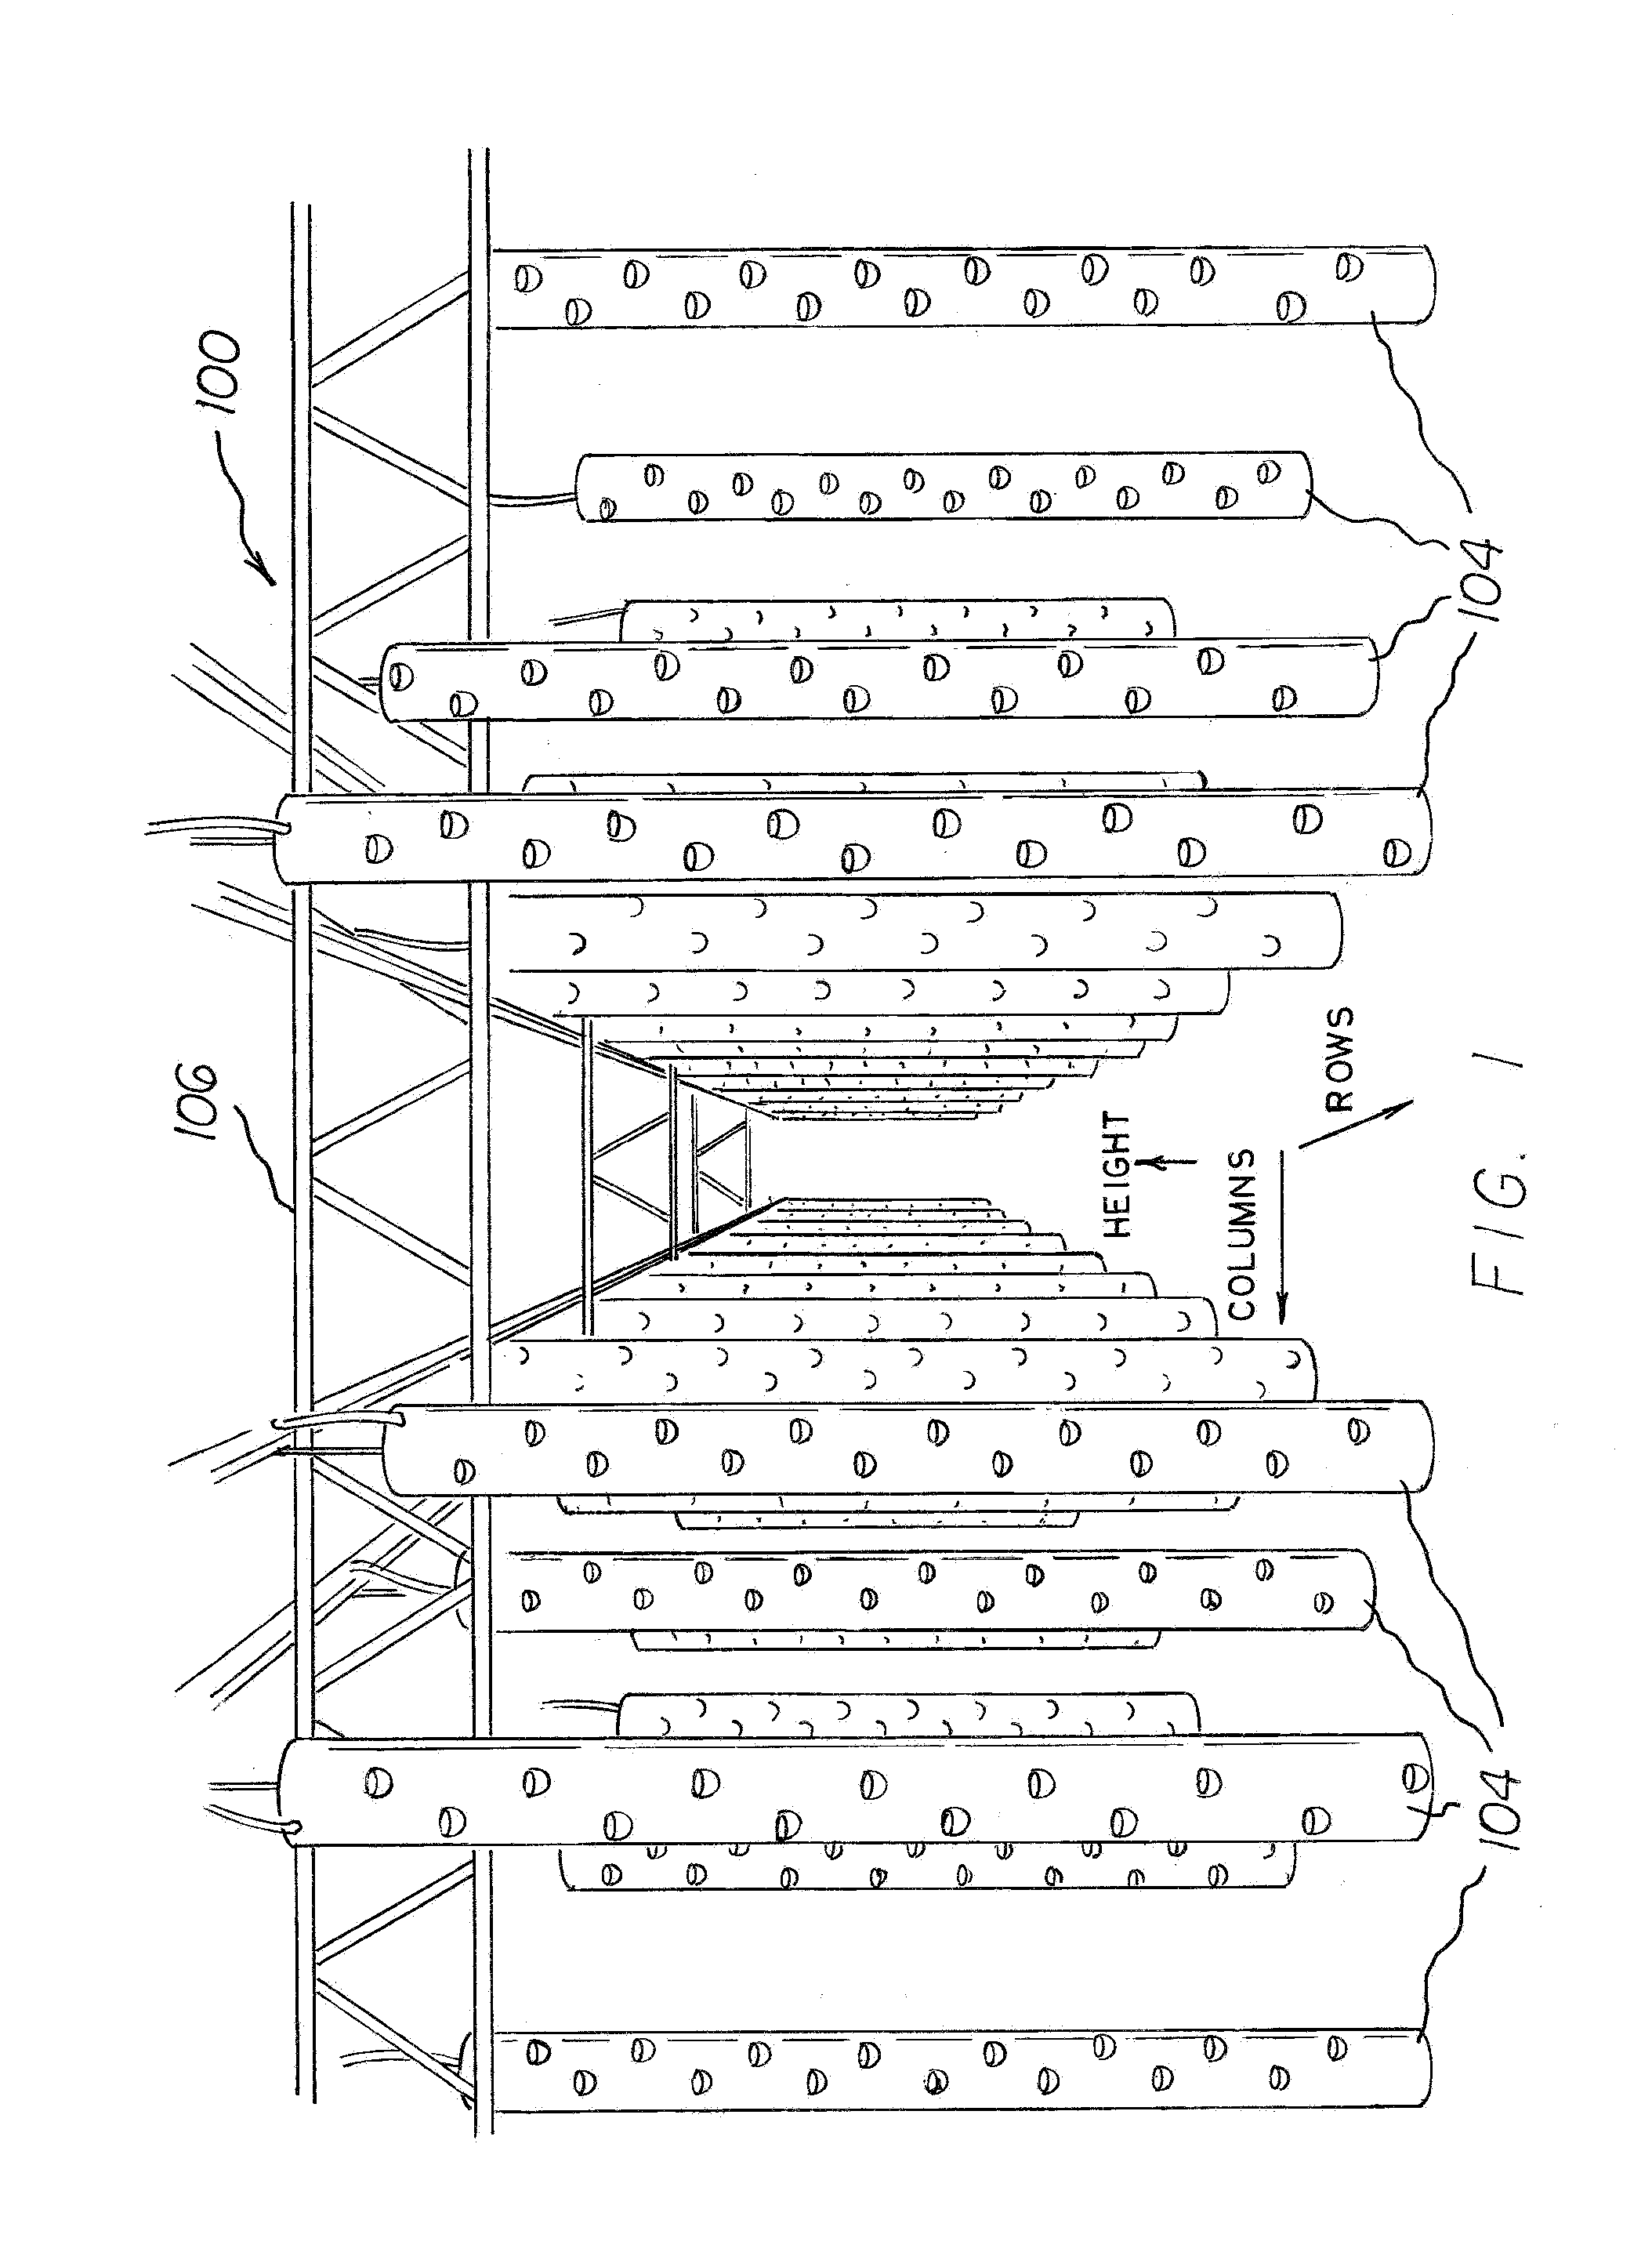 Aeroponic growing system and method